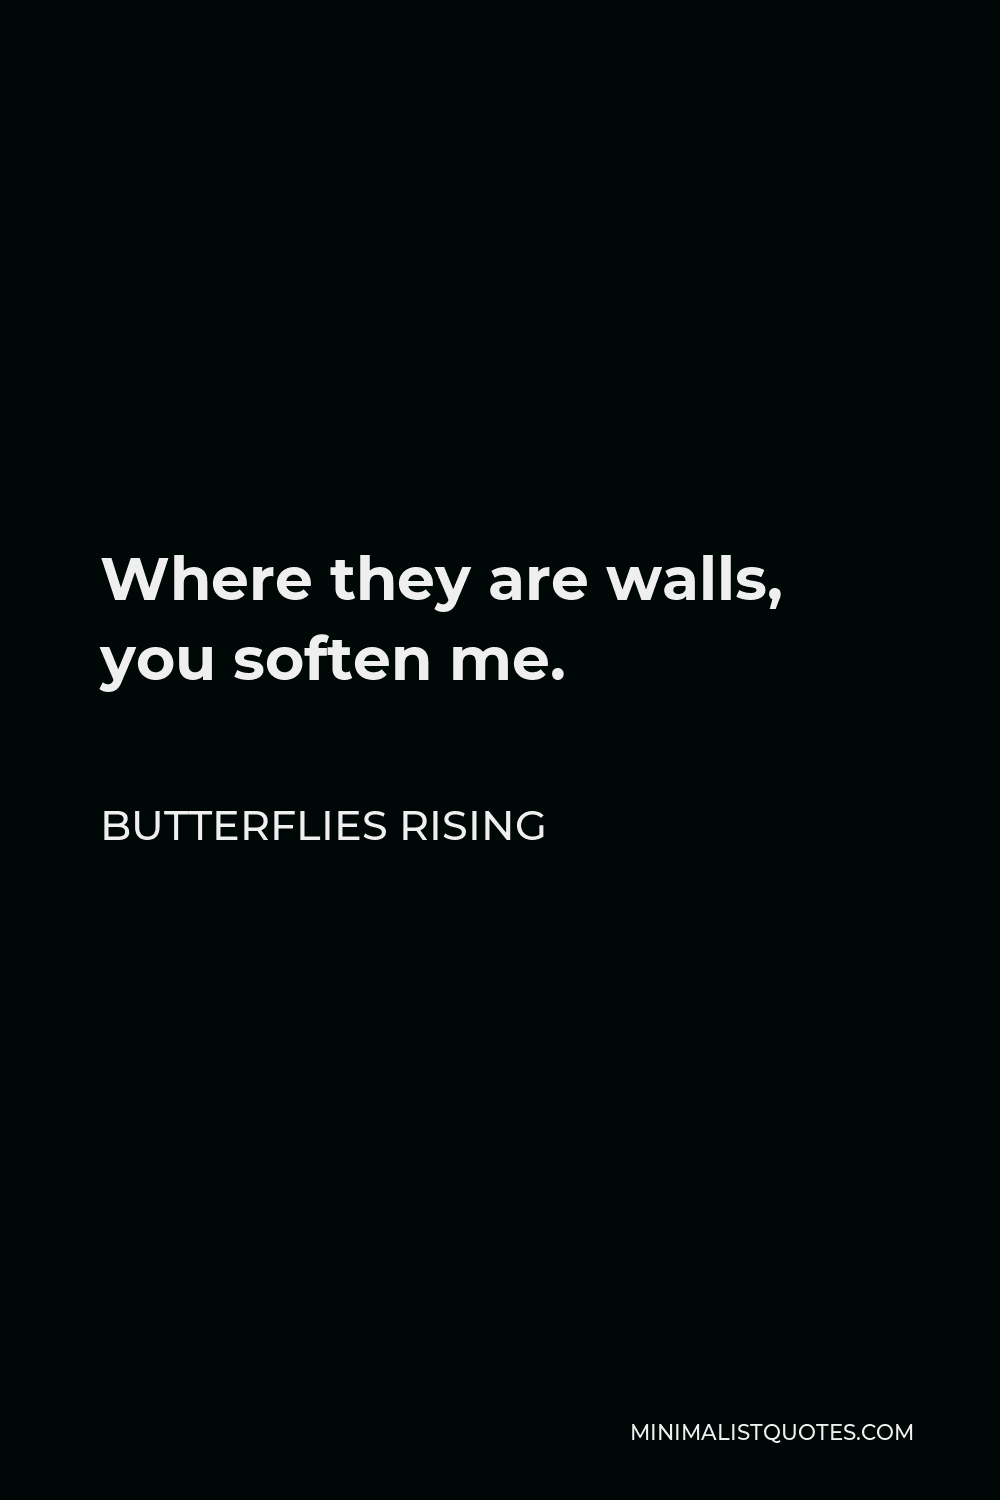 Butterflies Rising Quote - Where they are walls, you soften me.